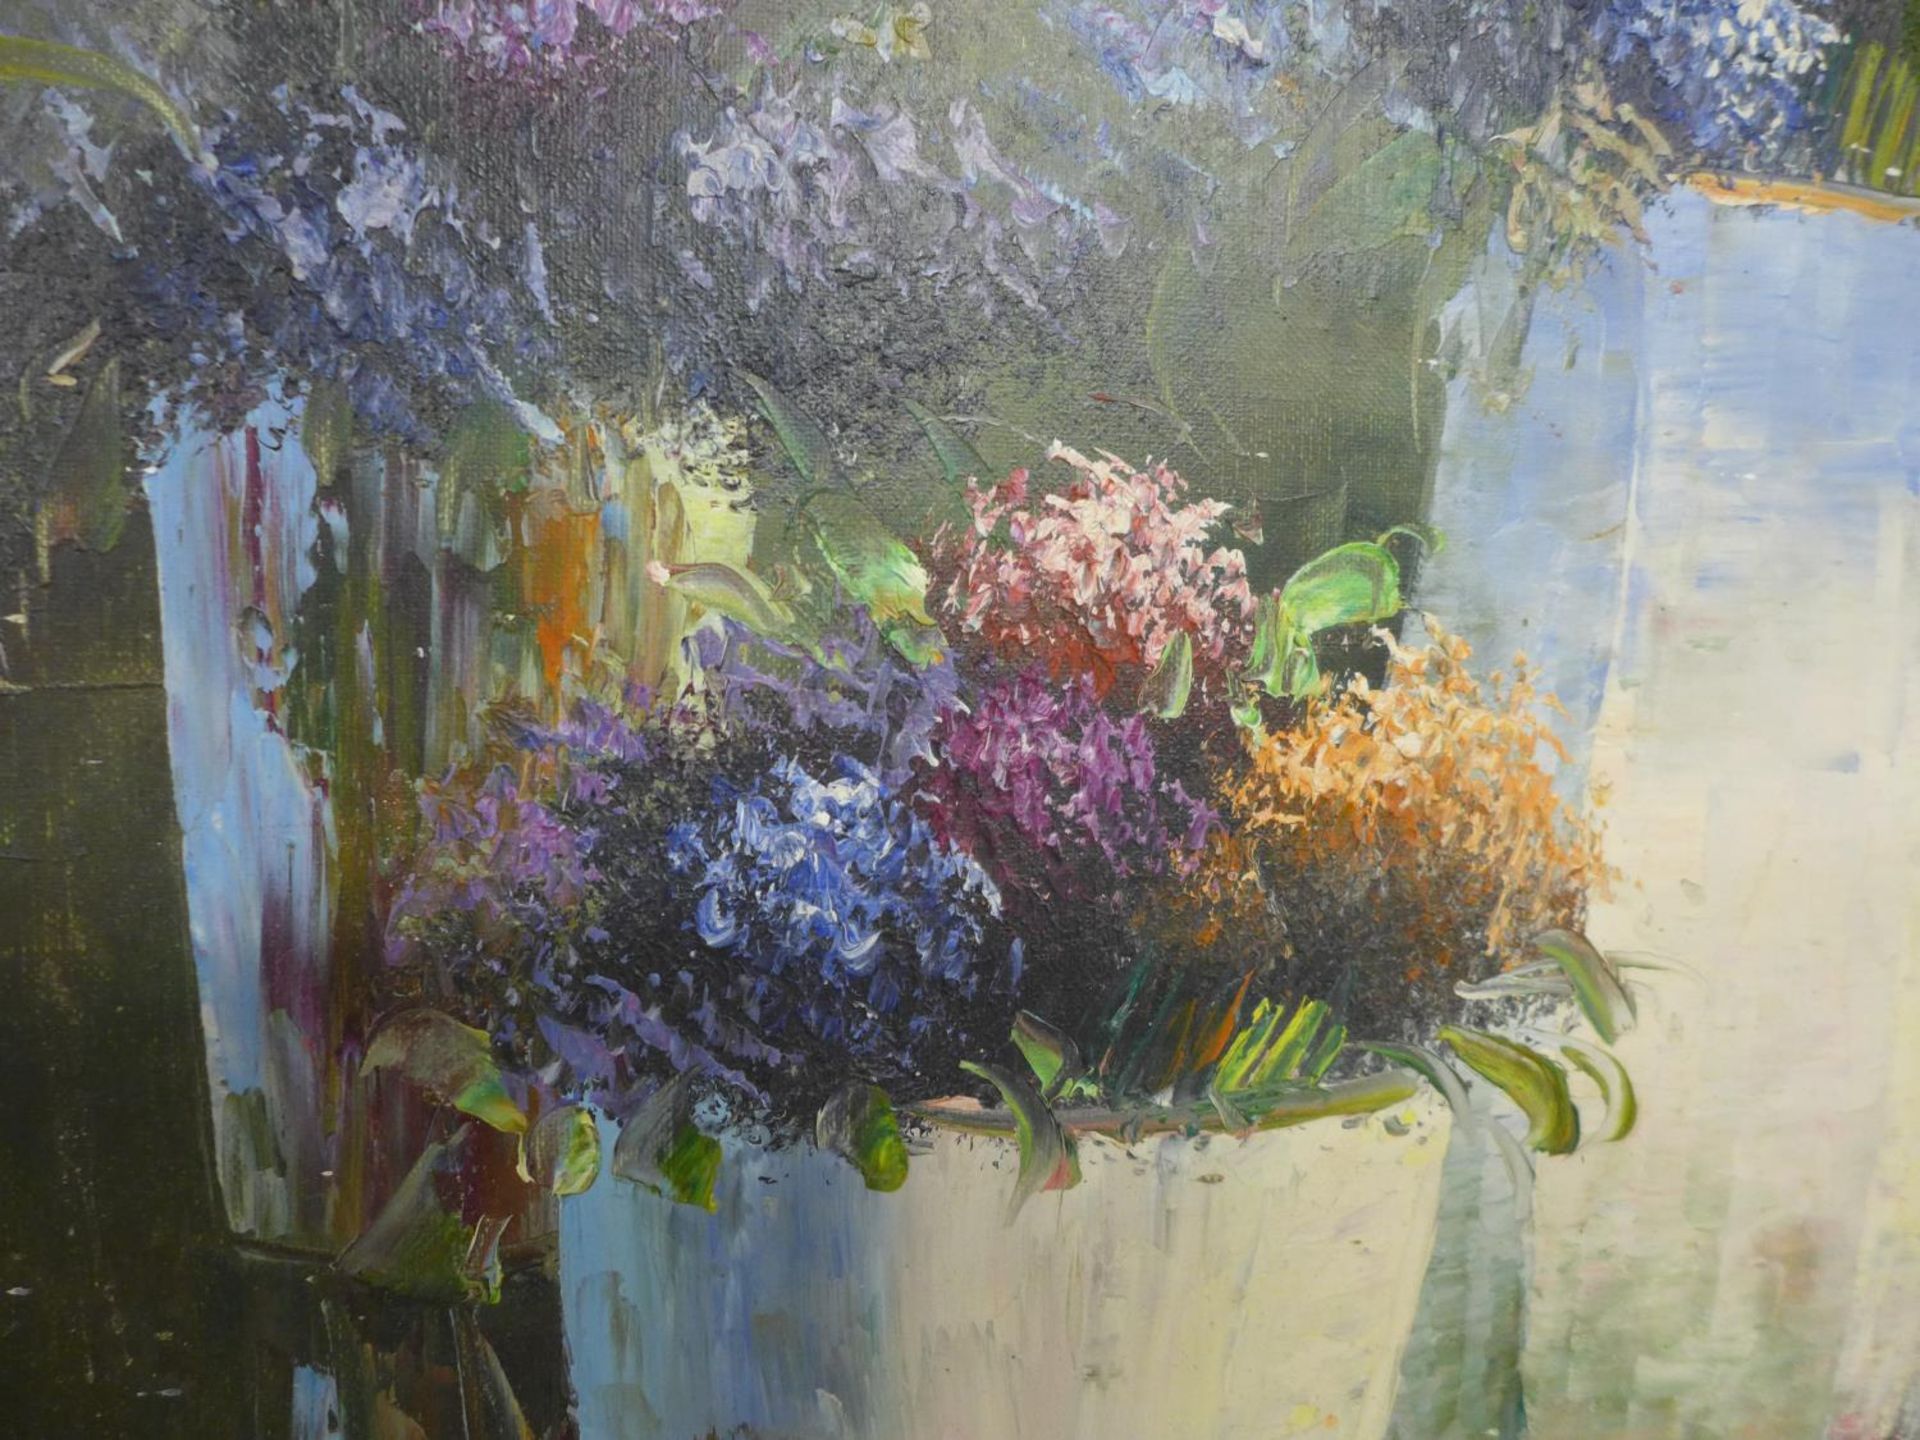 RENNICK (LATE 20TH/EARLY 21ST CENTURY) VASES OF FLOWERS, OIL ON CANVAS, SIGNED, 60X90CM, FRAMED - Image 3 of 4